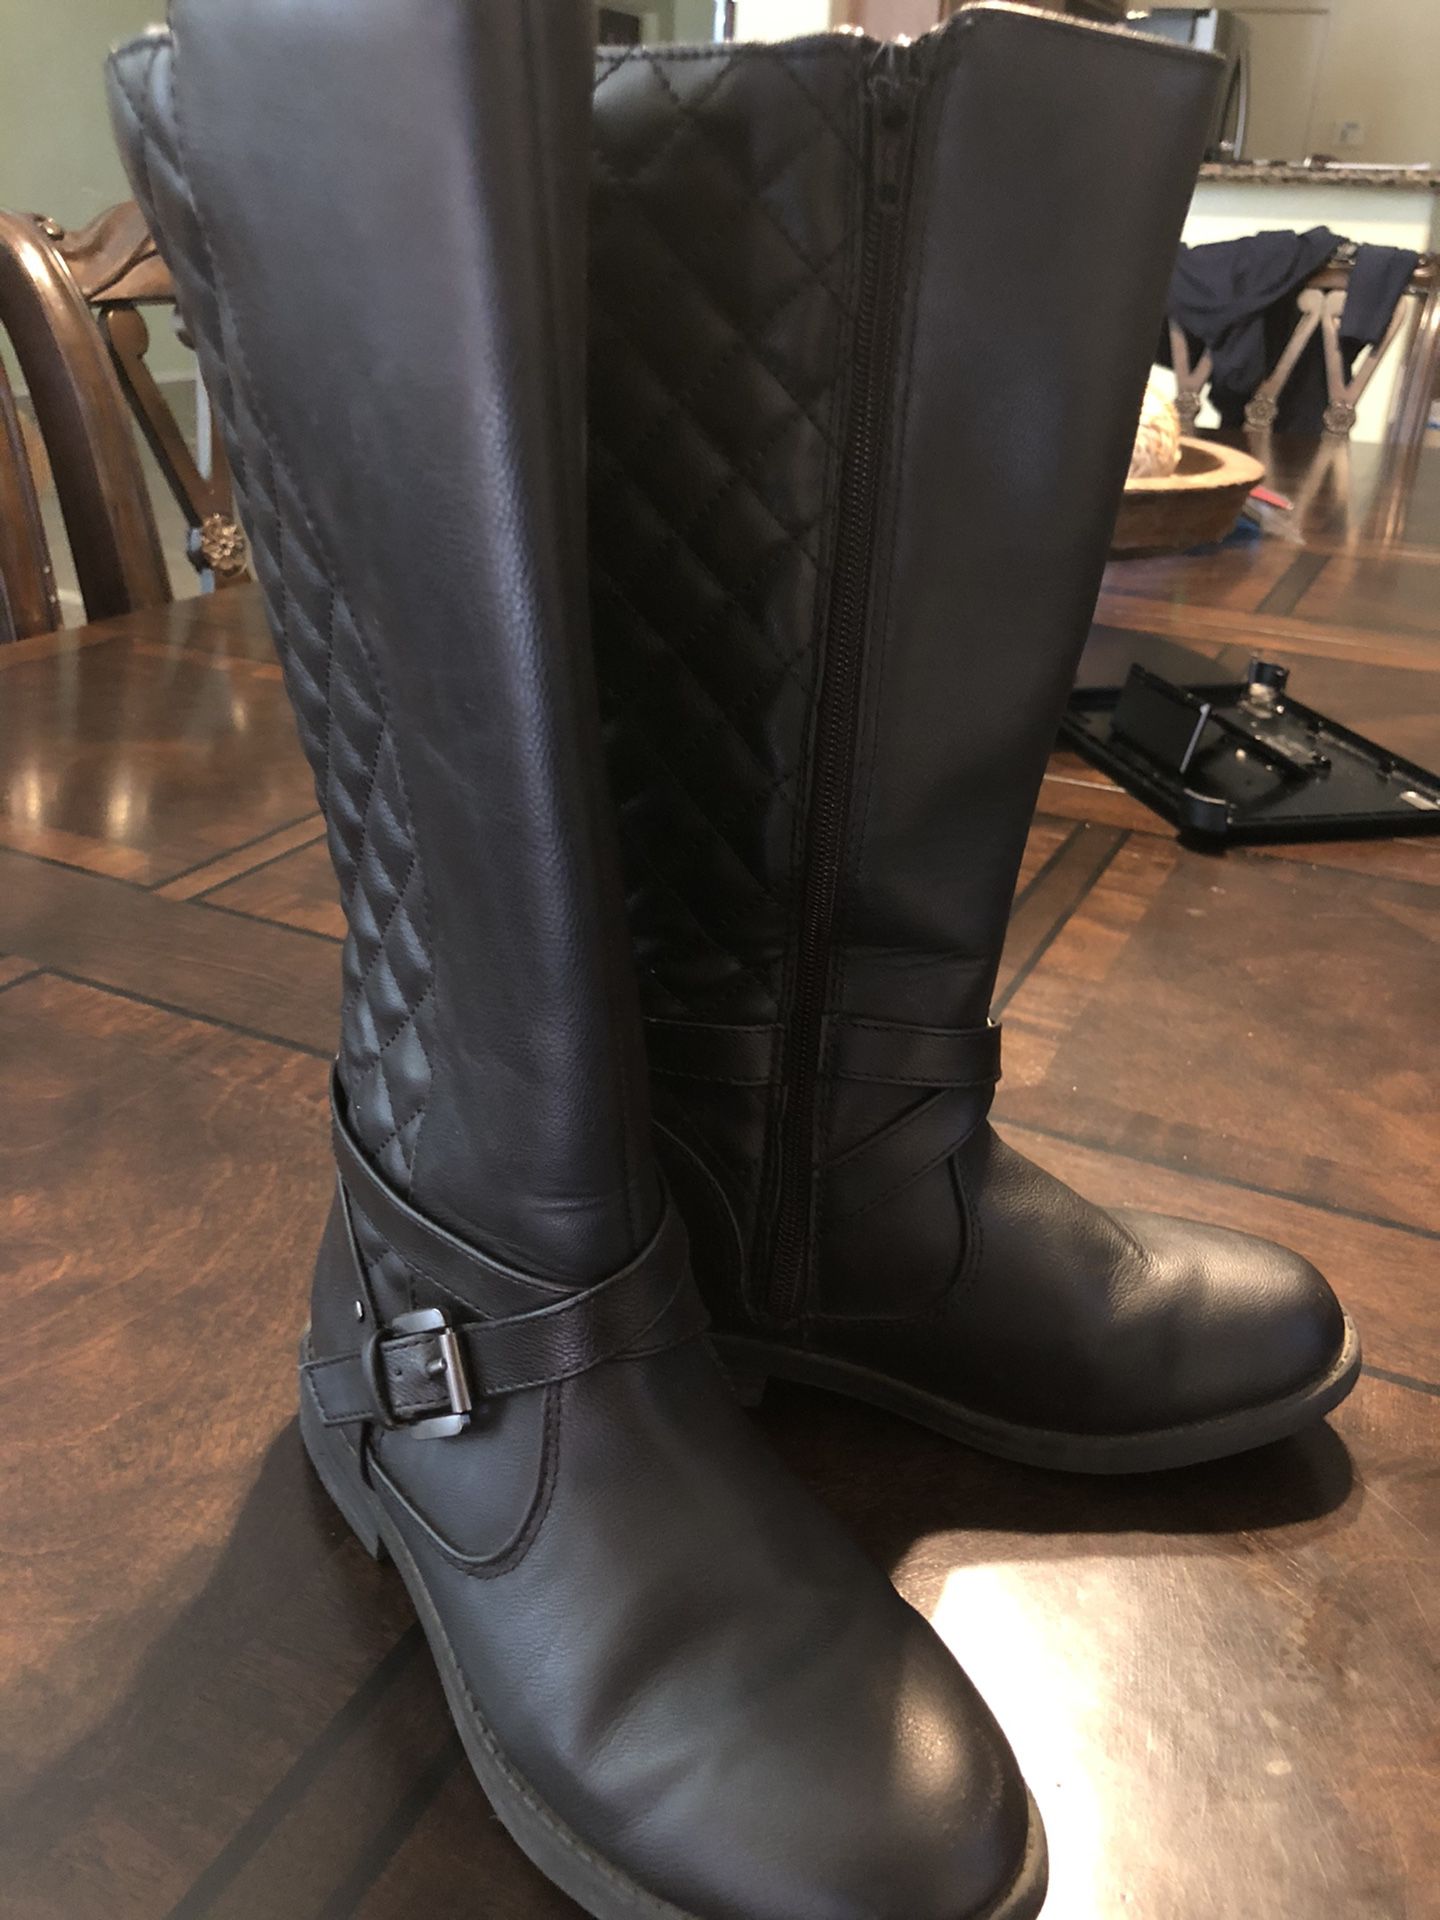 Girls Size 1 black boots